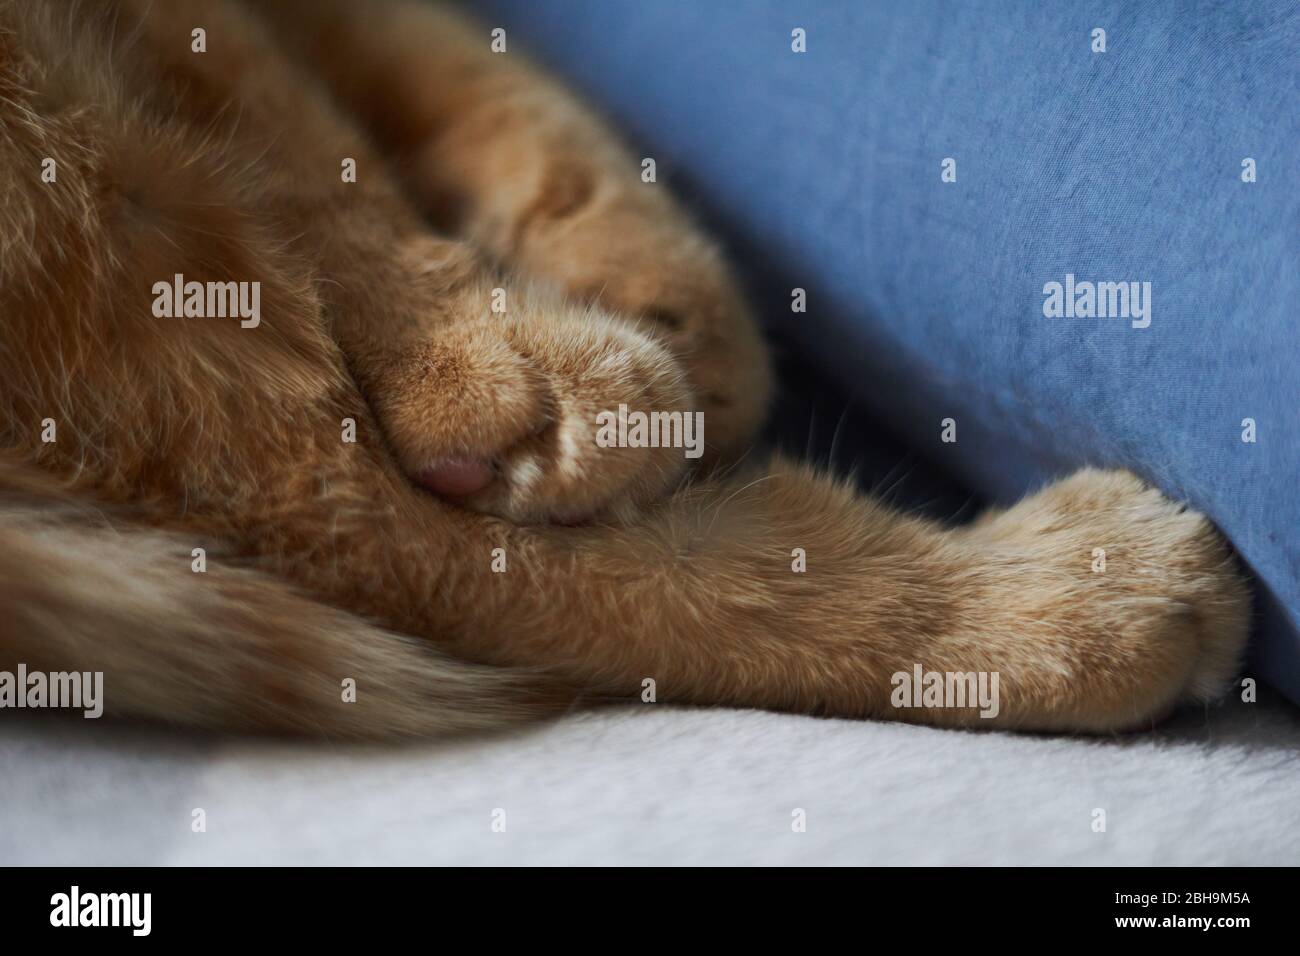 Closeup paw of a ginger cat on a white background, on a white blanket and blue pillow Stock Photo